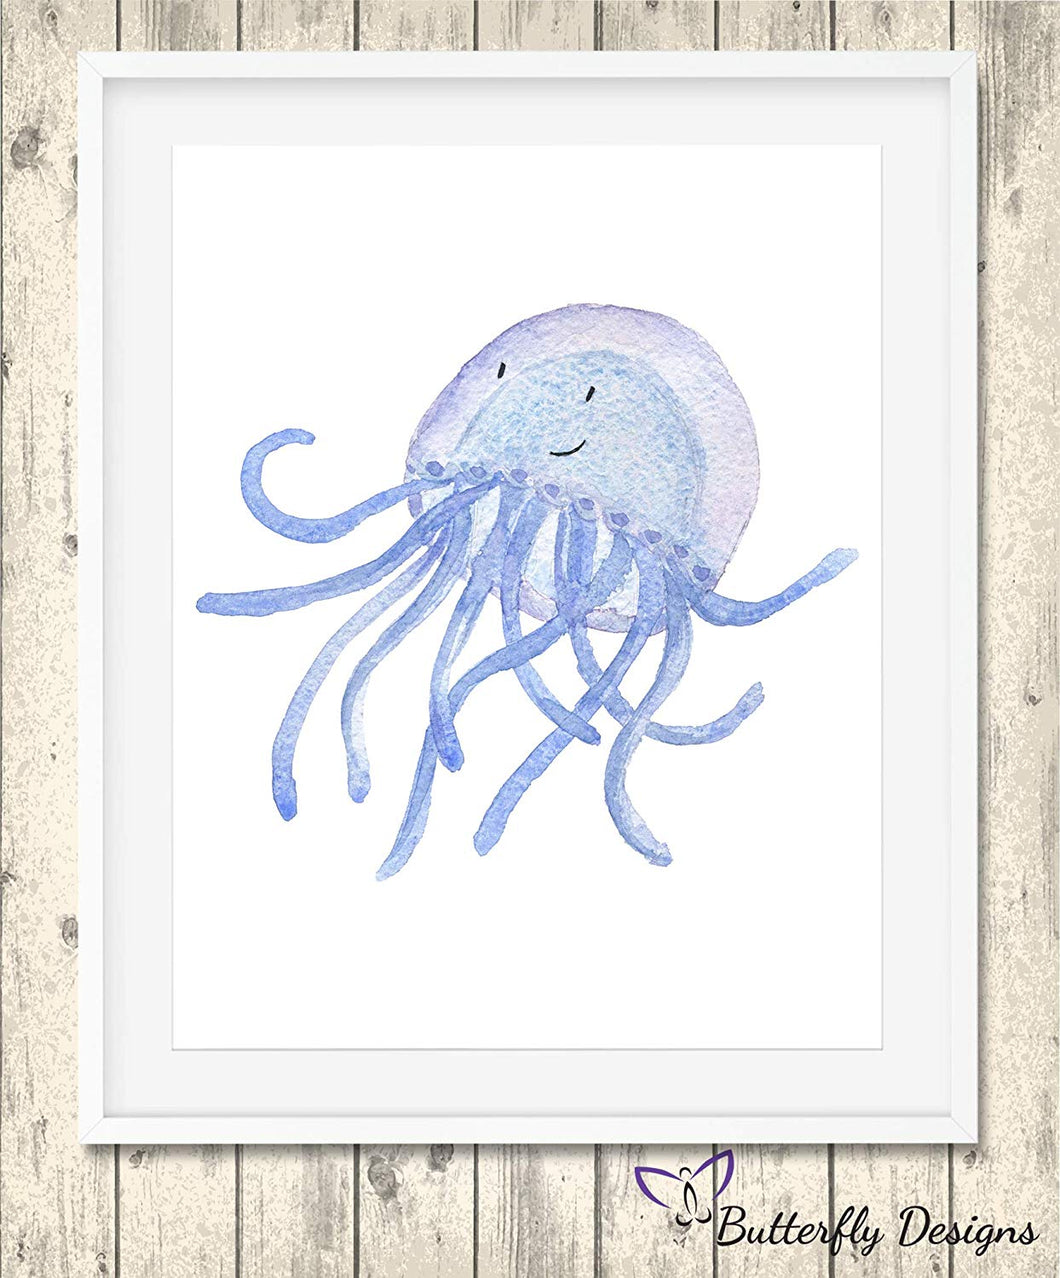 Jellyfish Watercolour Wildlife Animal A4 Print Picture